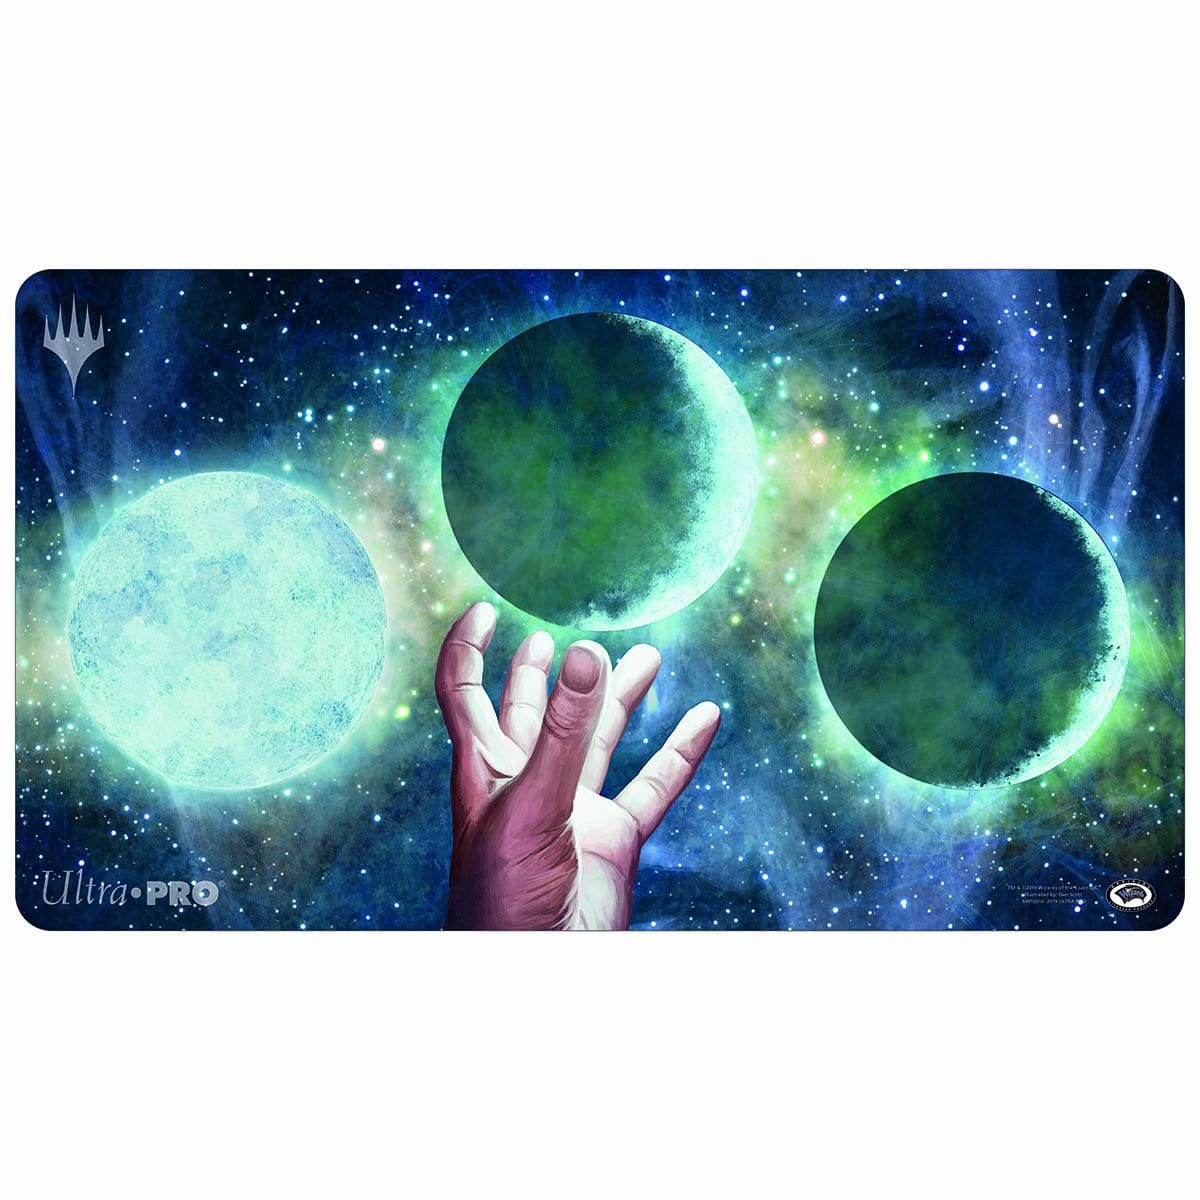 Ponder Playmat - Playmat - Original Magic Art - Accessories for Magic the Gathering and other card games